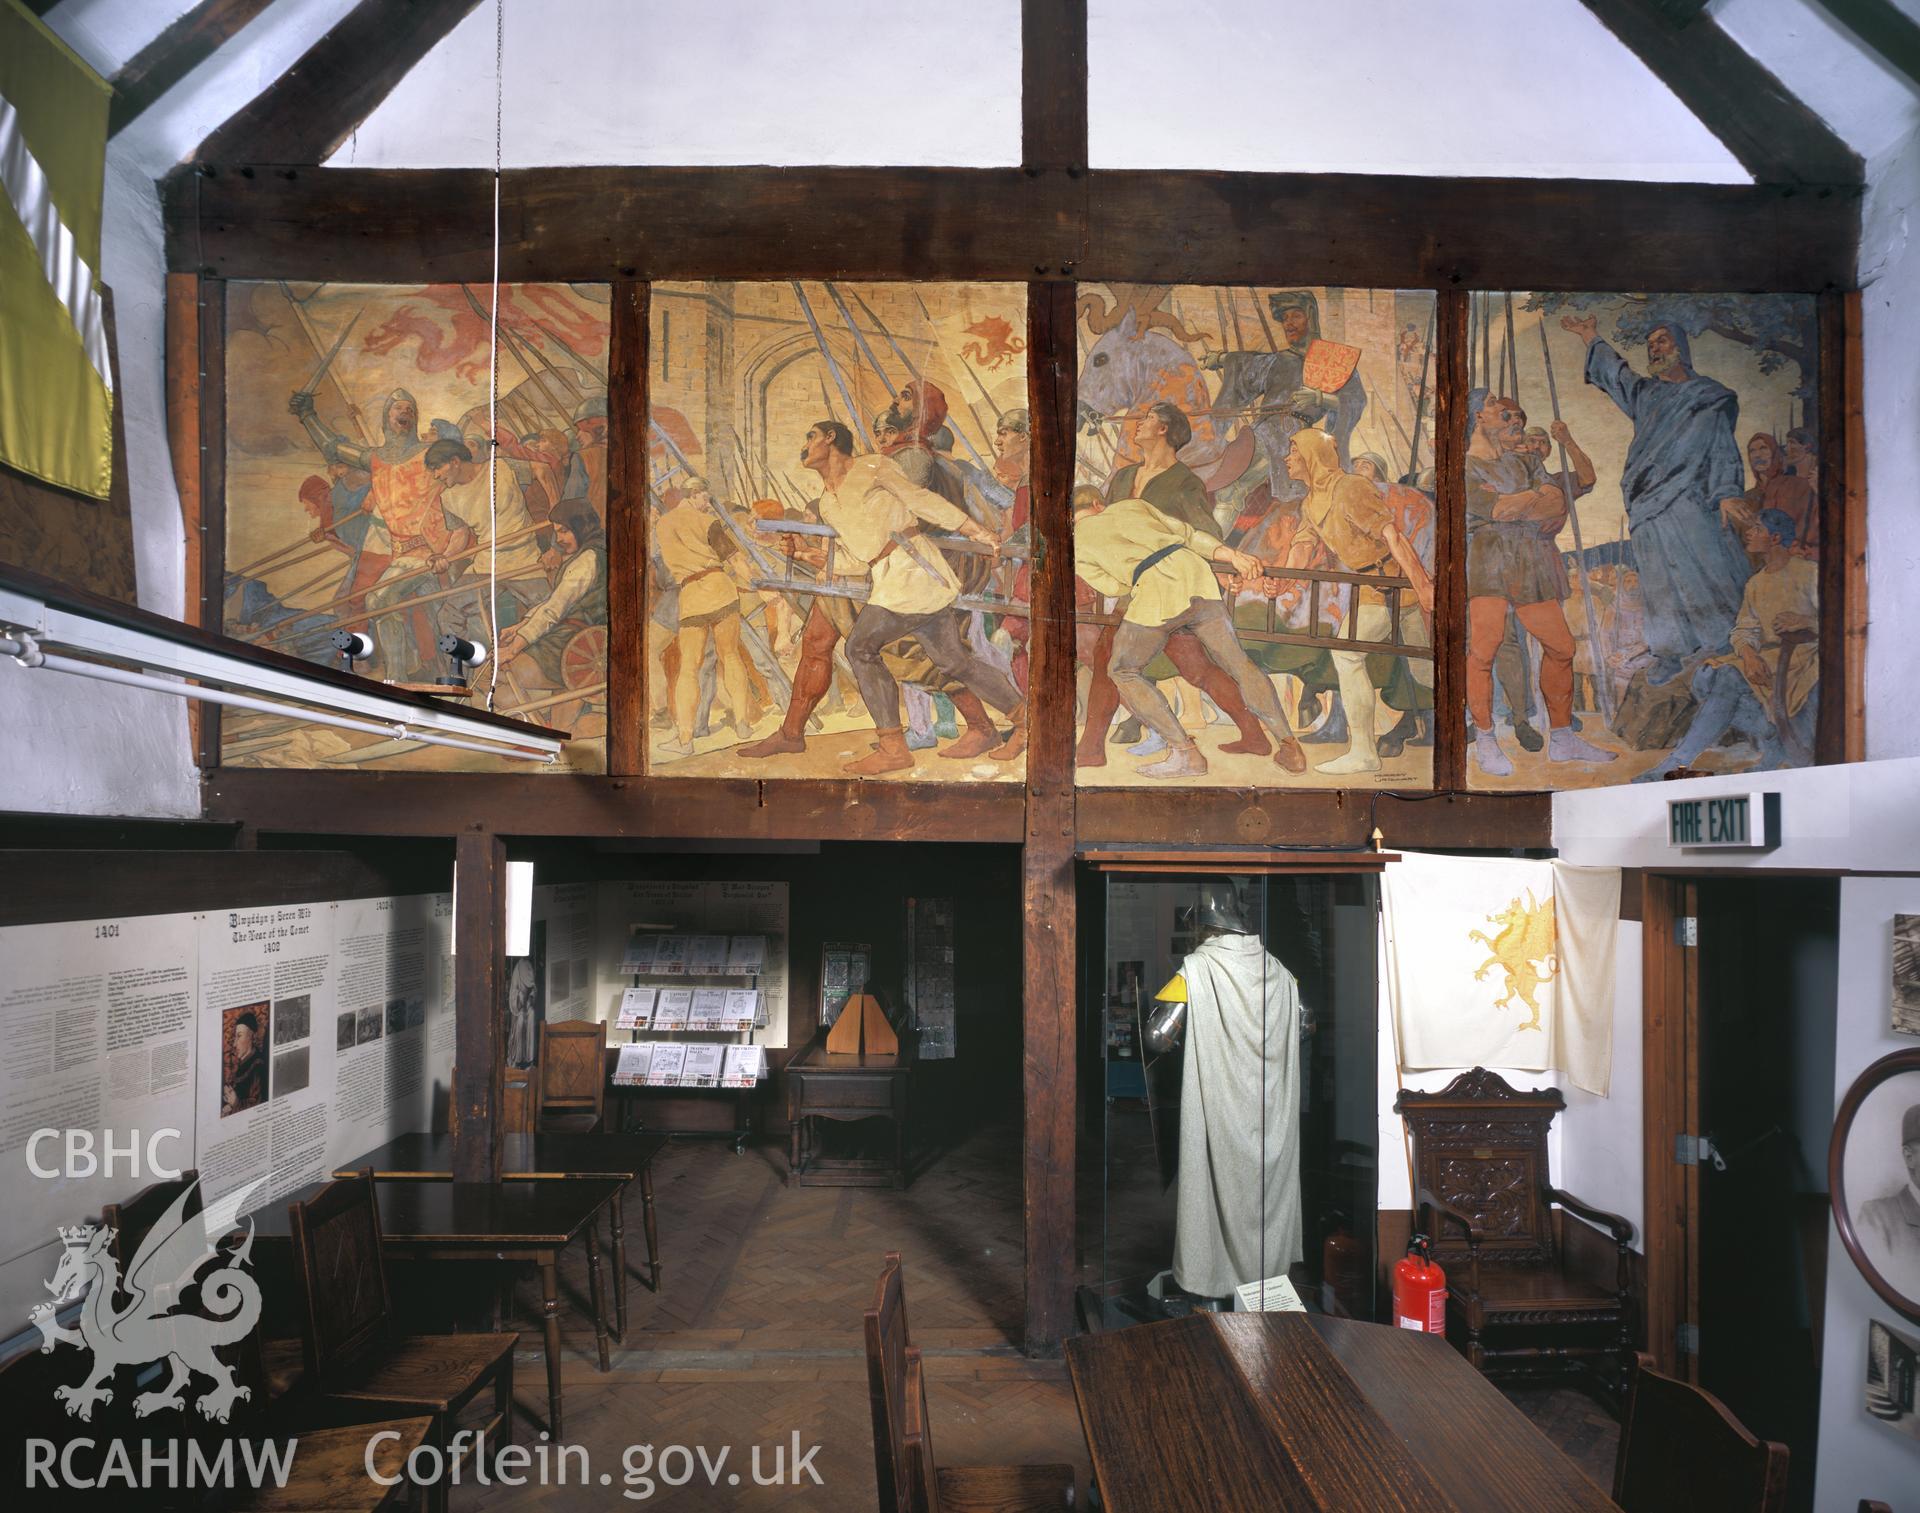 Colour transparency showing  view of mural in Parliament House, Machynlleth, produced by Iain Wright 2004